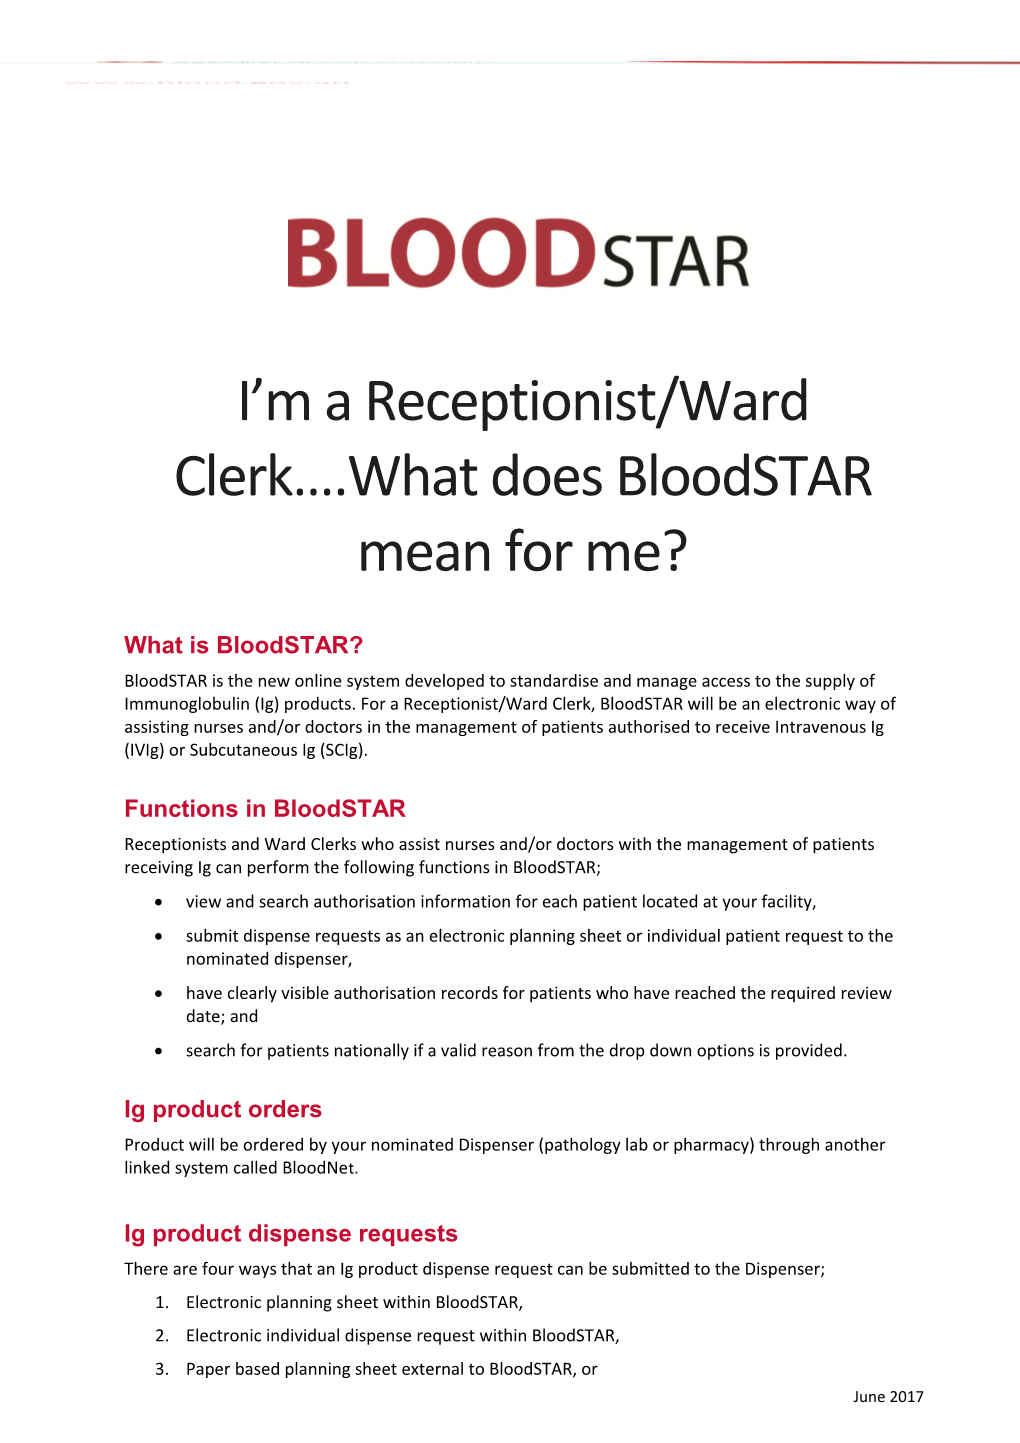 I M a Receptionist/Ward Clerk .What Does Bloodstar Mean for Me?